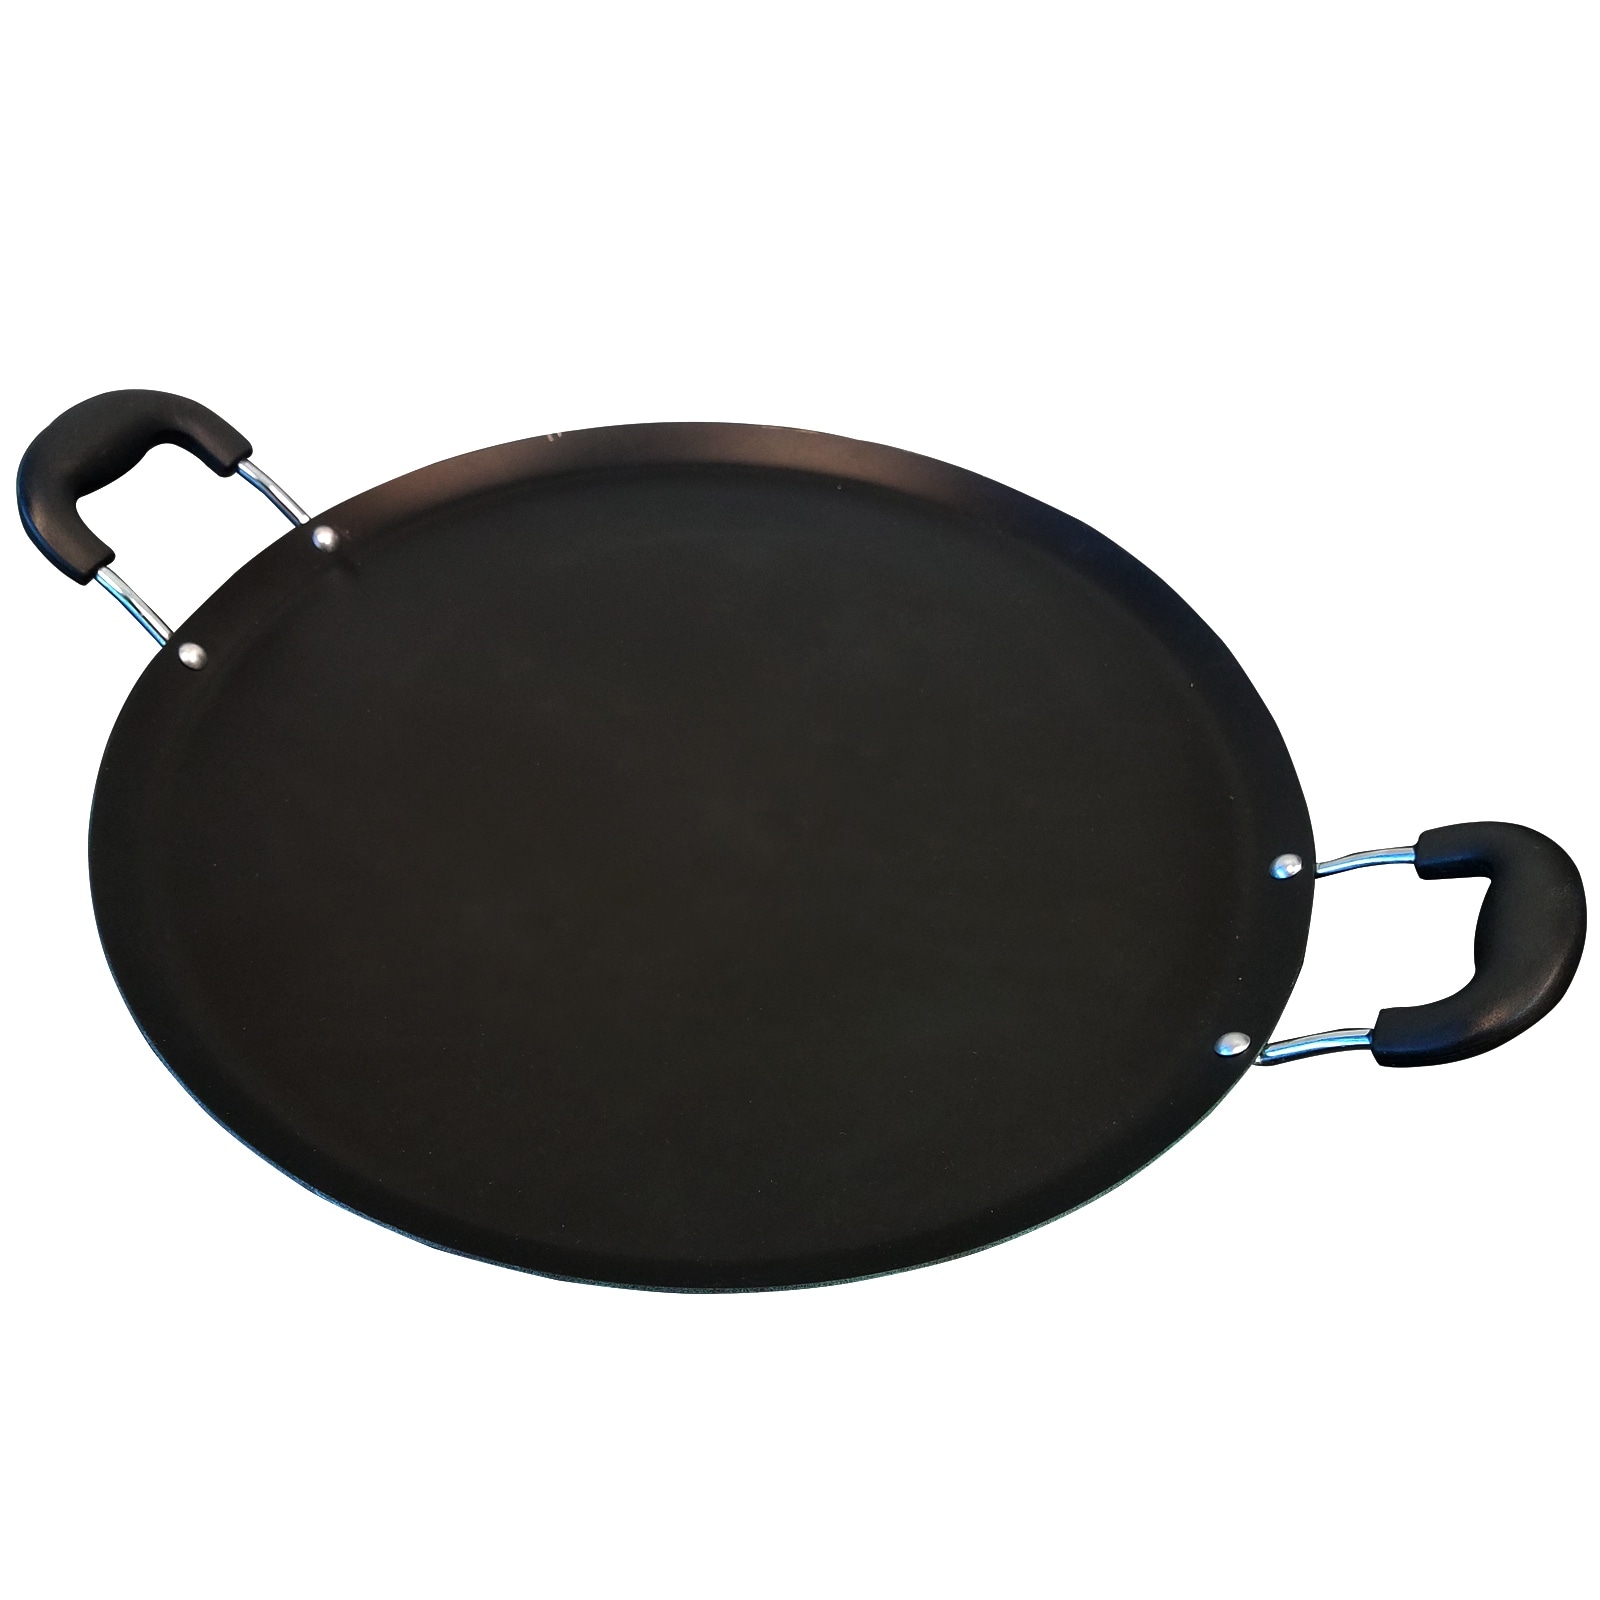 https://ak1.ostkcdn.com/images/products/is/images/direct/867020ed013f47f17398a510864eee06ca2a3acf/Zadora-14%22-Nonstick-Carbon-Steel-Comal-in-Teal.jpg